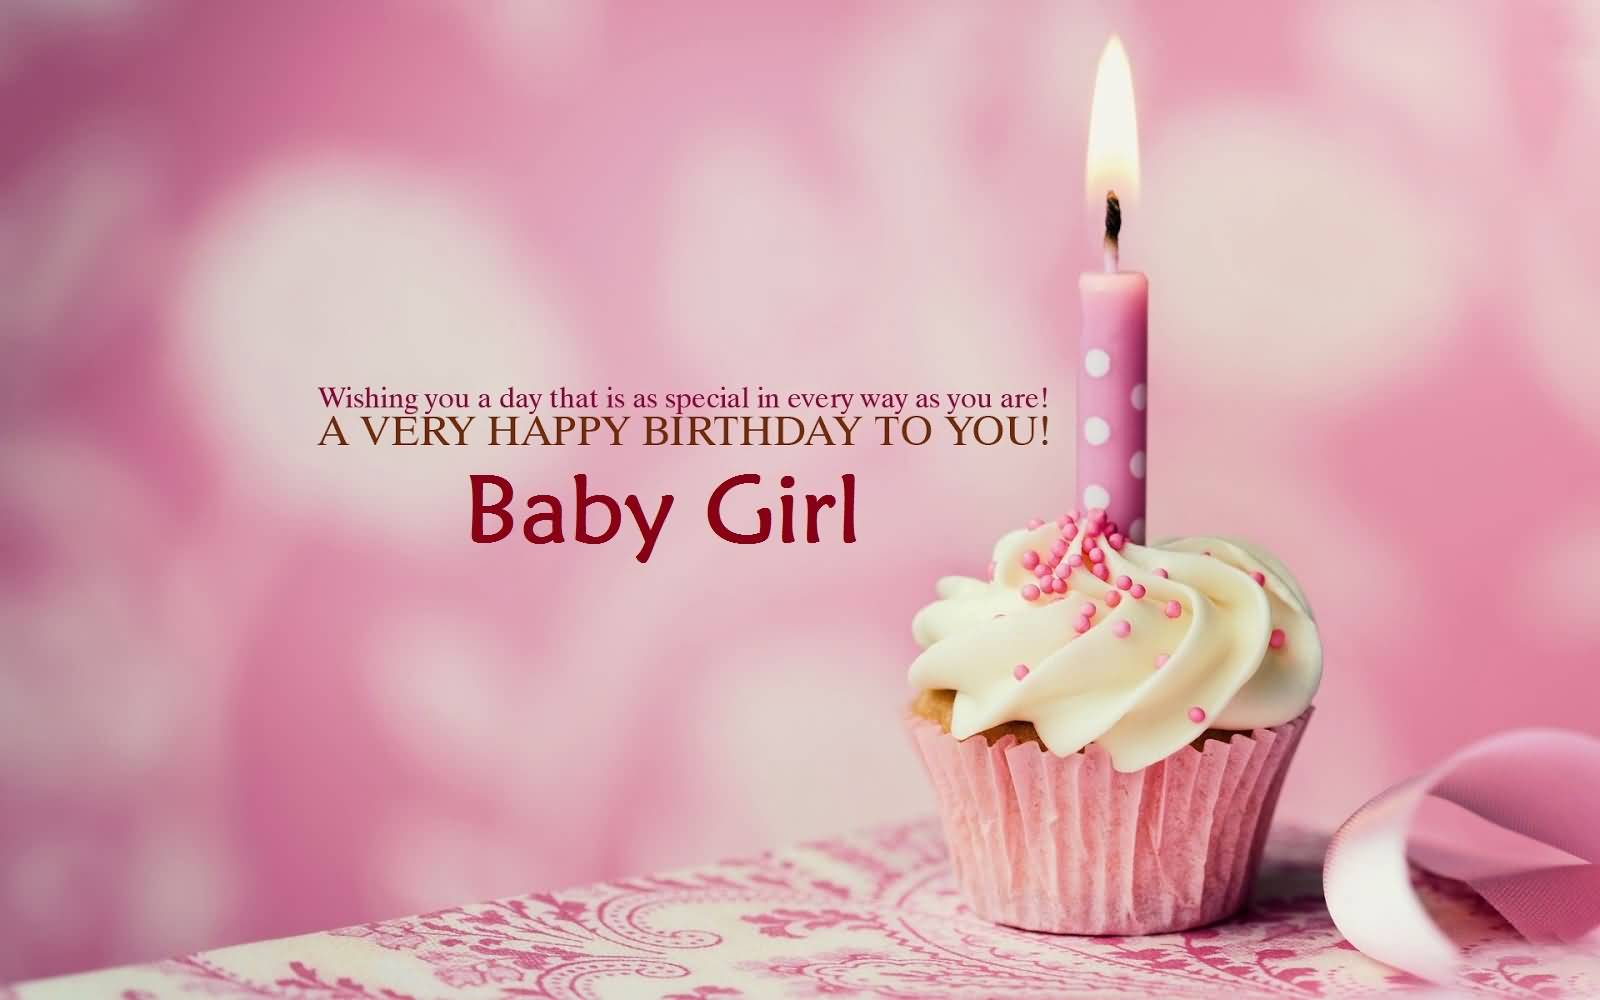 Happy Birthday Message For Baby Girl - Happy Birthday Wishes - 1600x1000  Wallpaper 